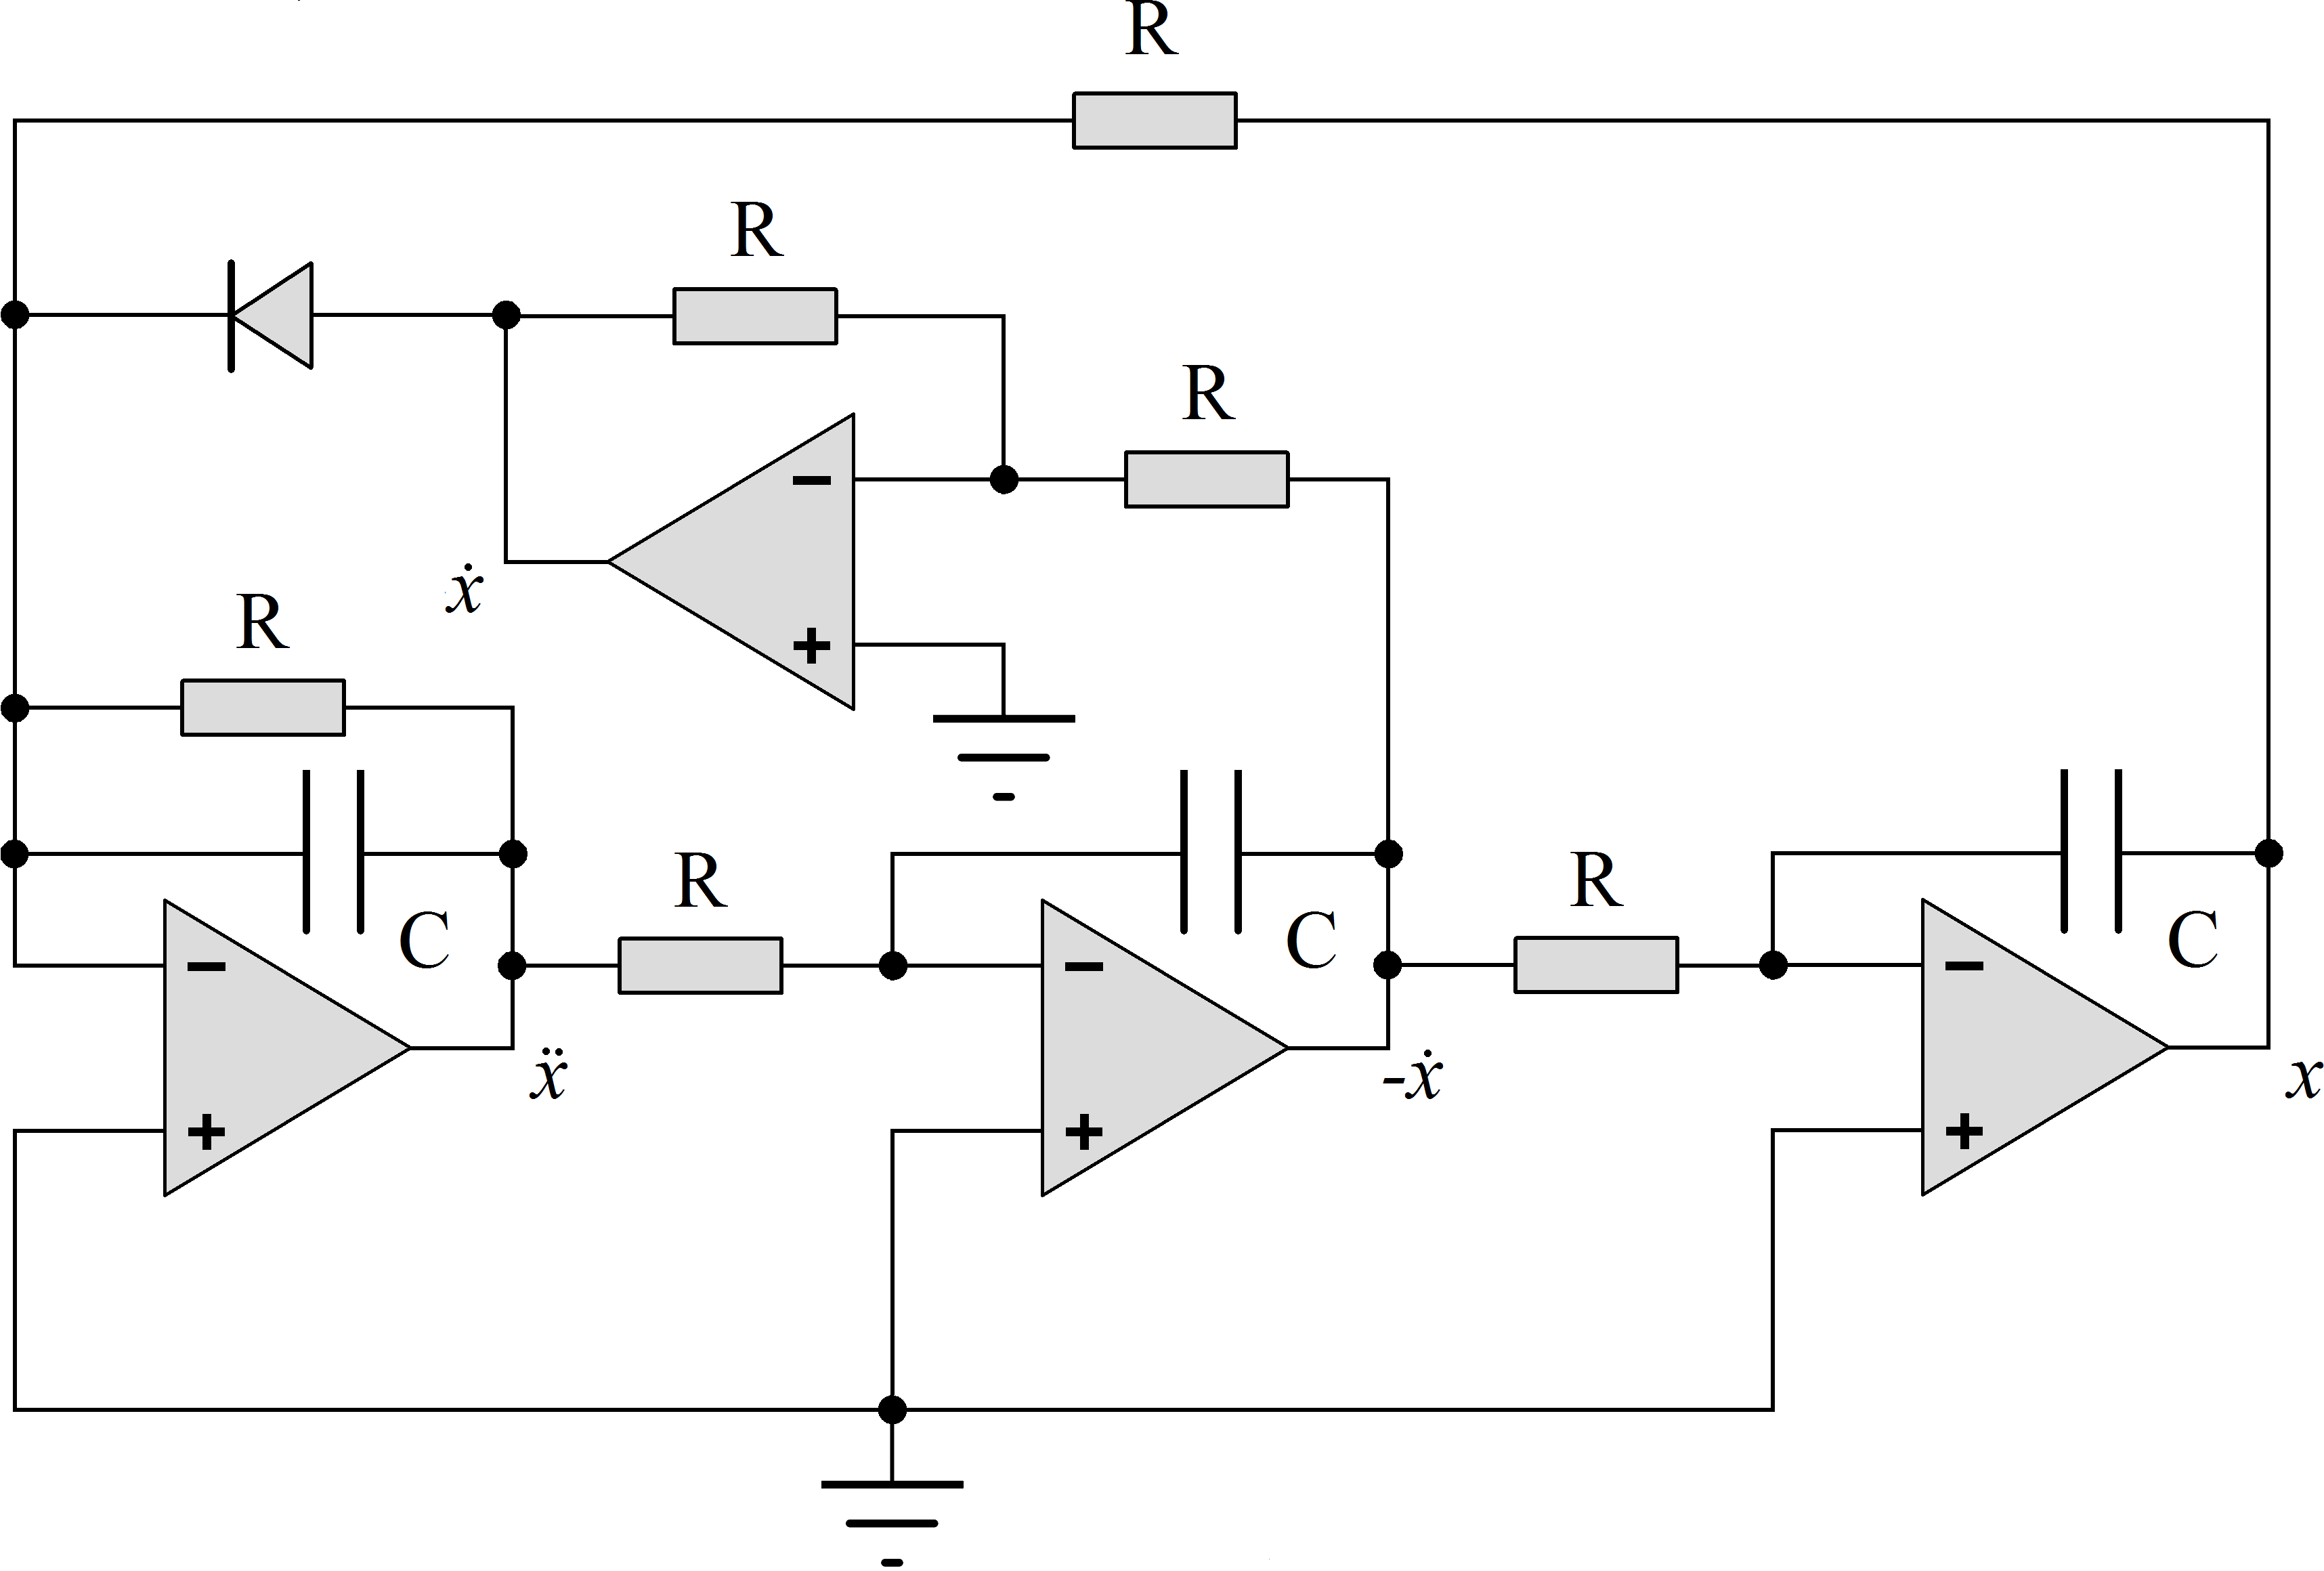 Chaotic circuit schematic